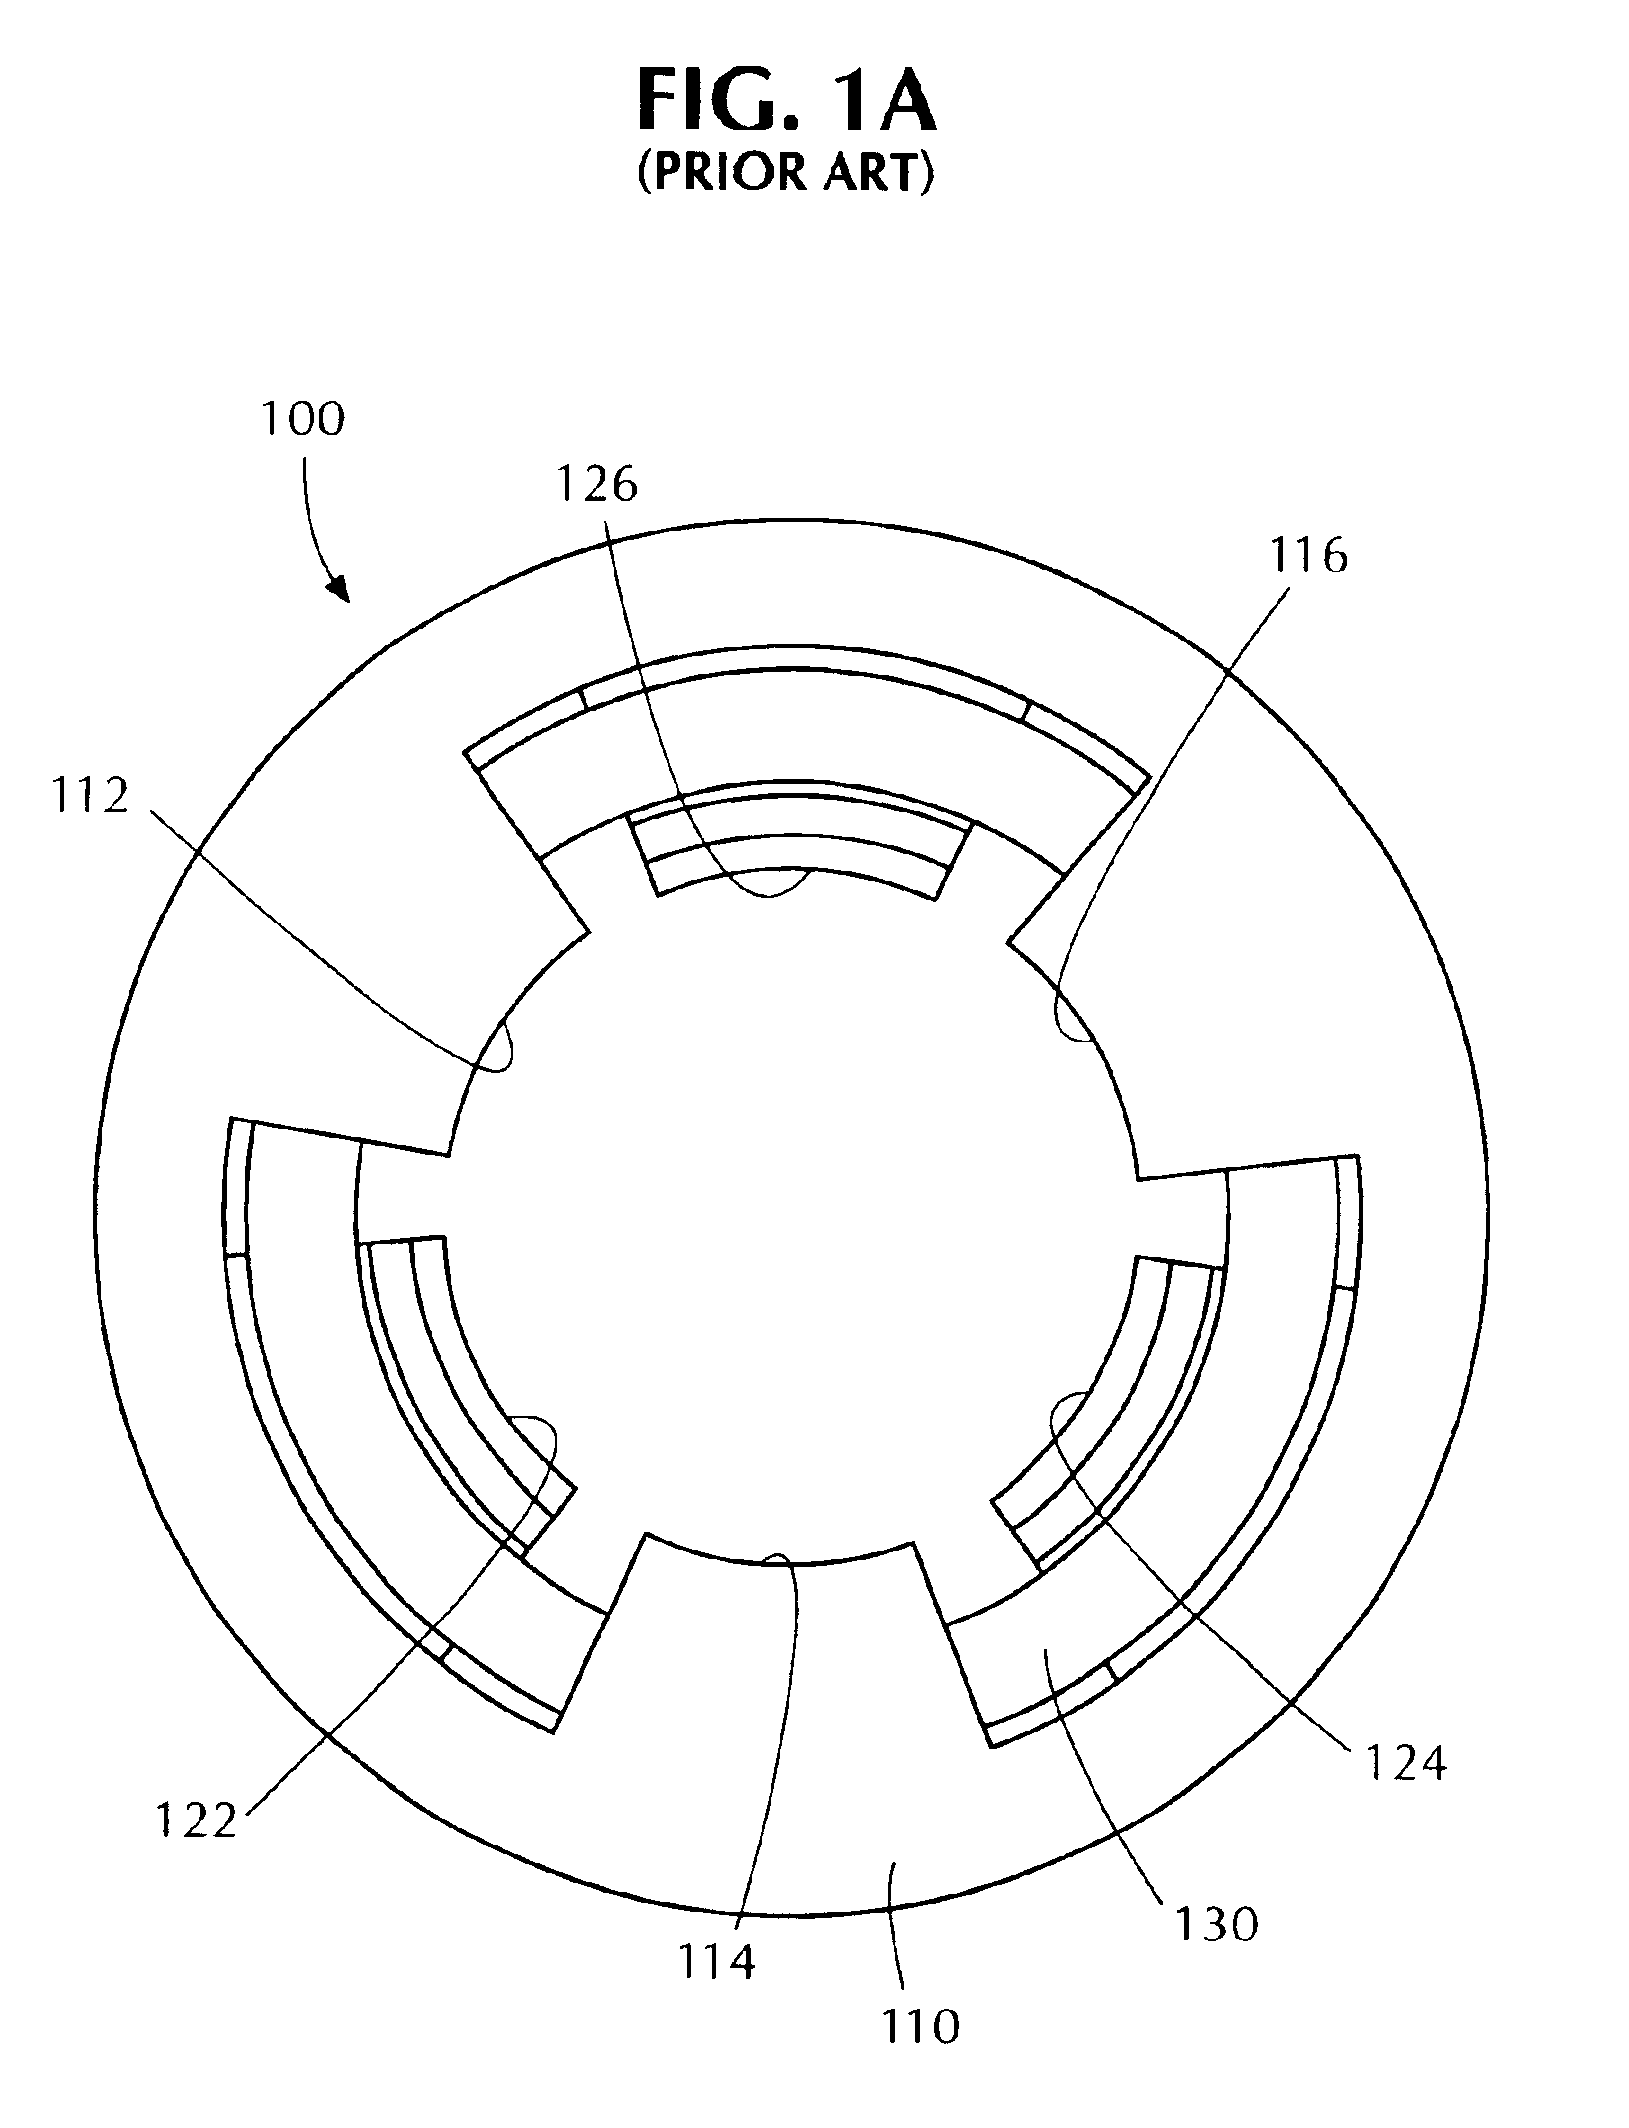 Polyphase claw pole structures for an electrical machine